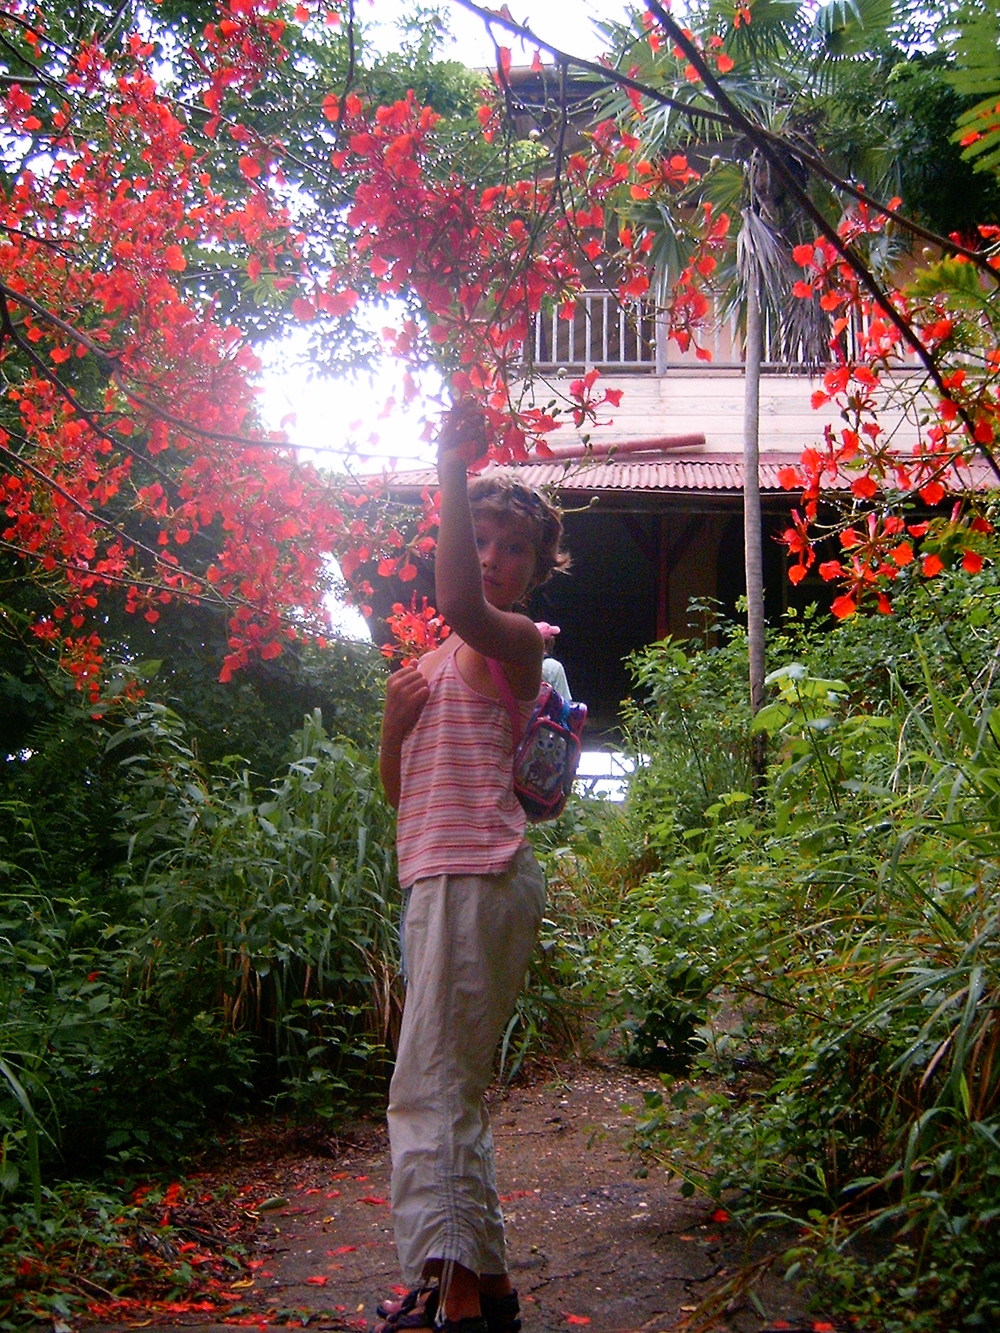 BLOODY FLOWERS @ HAUNTED CHACACHACARE